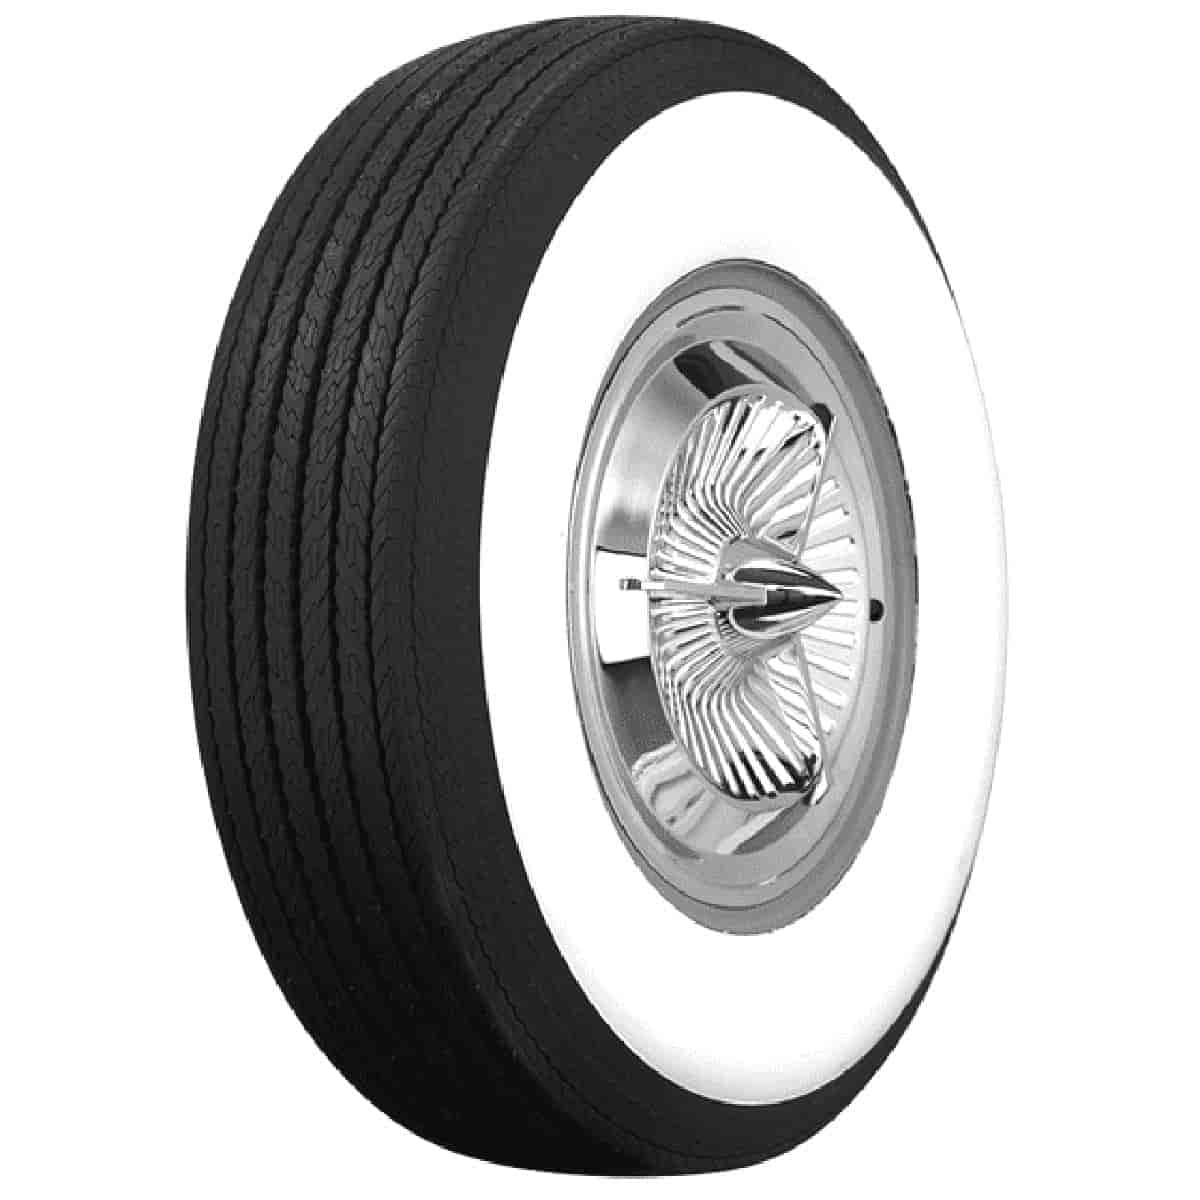 Coker Classic Wide Whitewall Bias Ply Tire H78-15